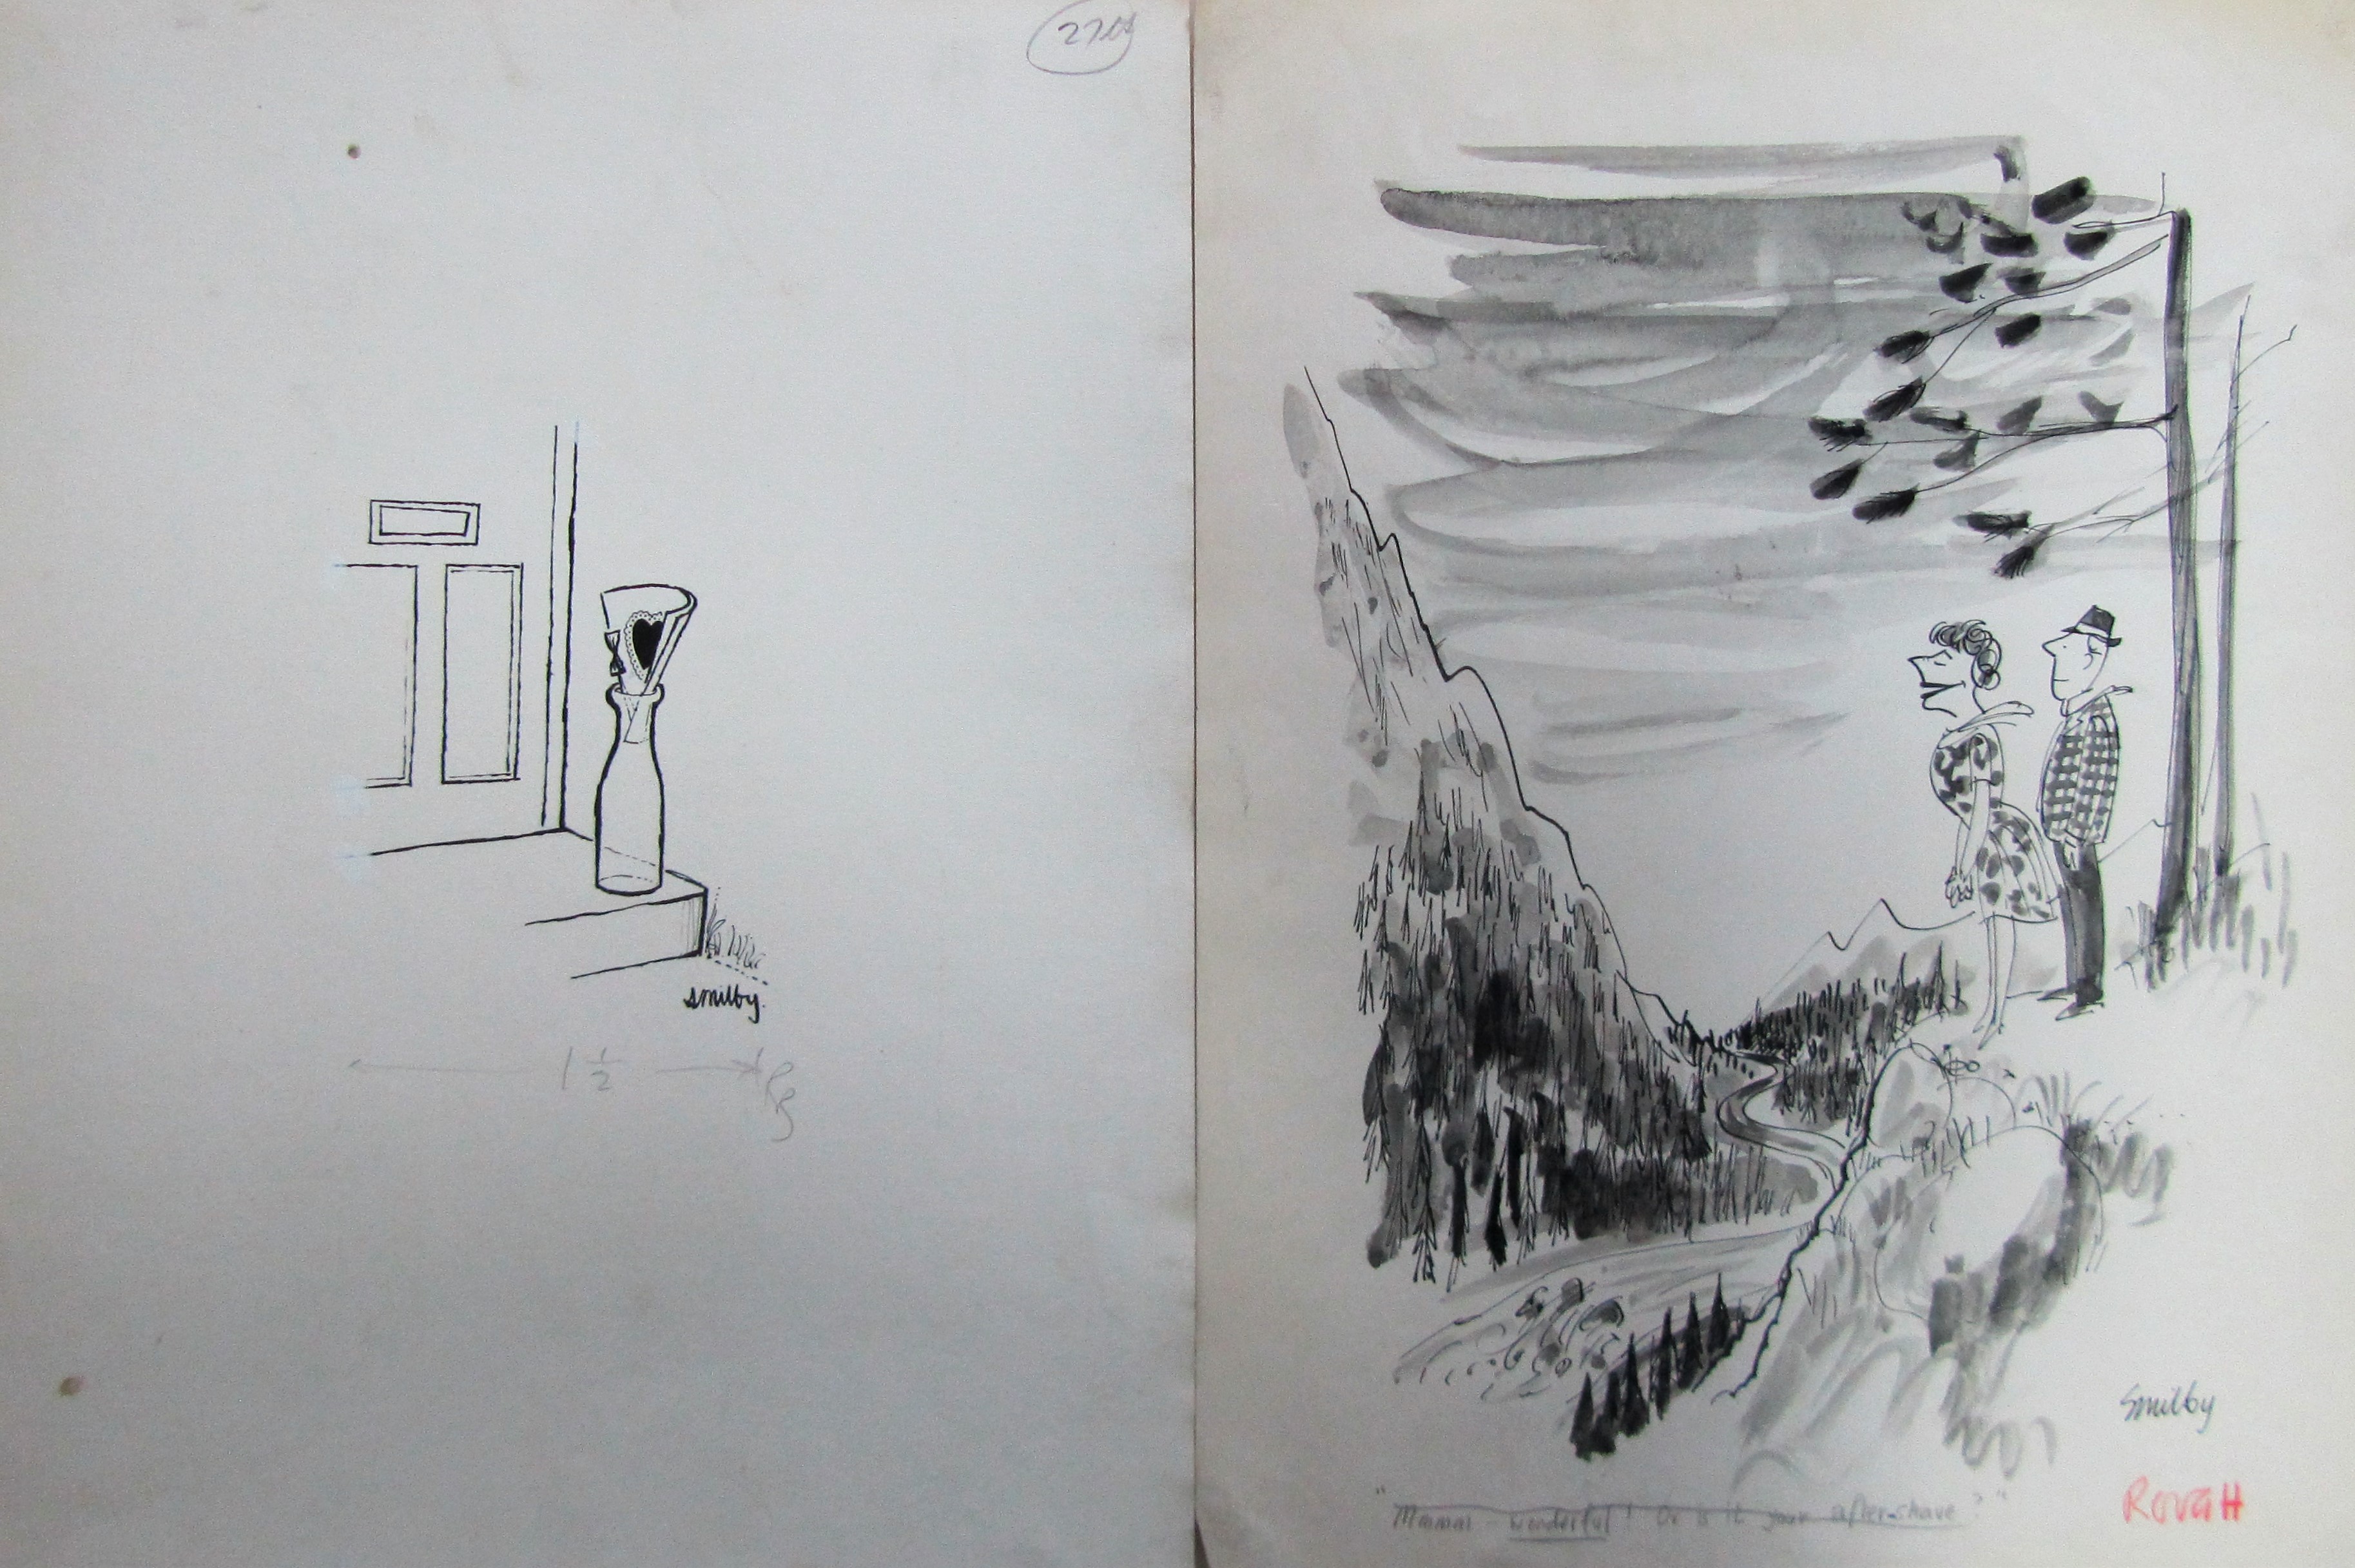 Smilby, Francis Wilford-Smith a collection ink & pen 'Romance, Dating' themed artists rough drawings - Image 4 of 6